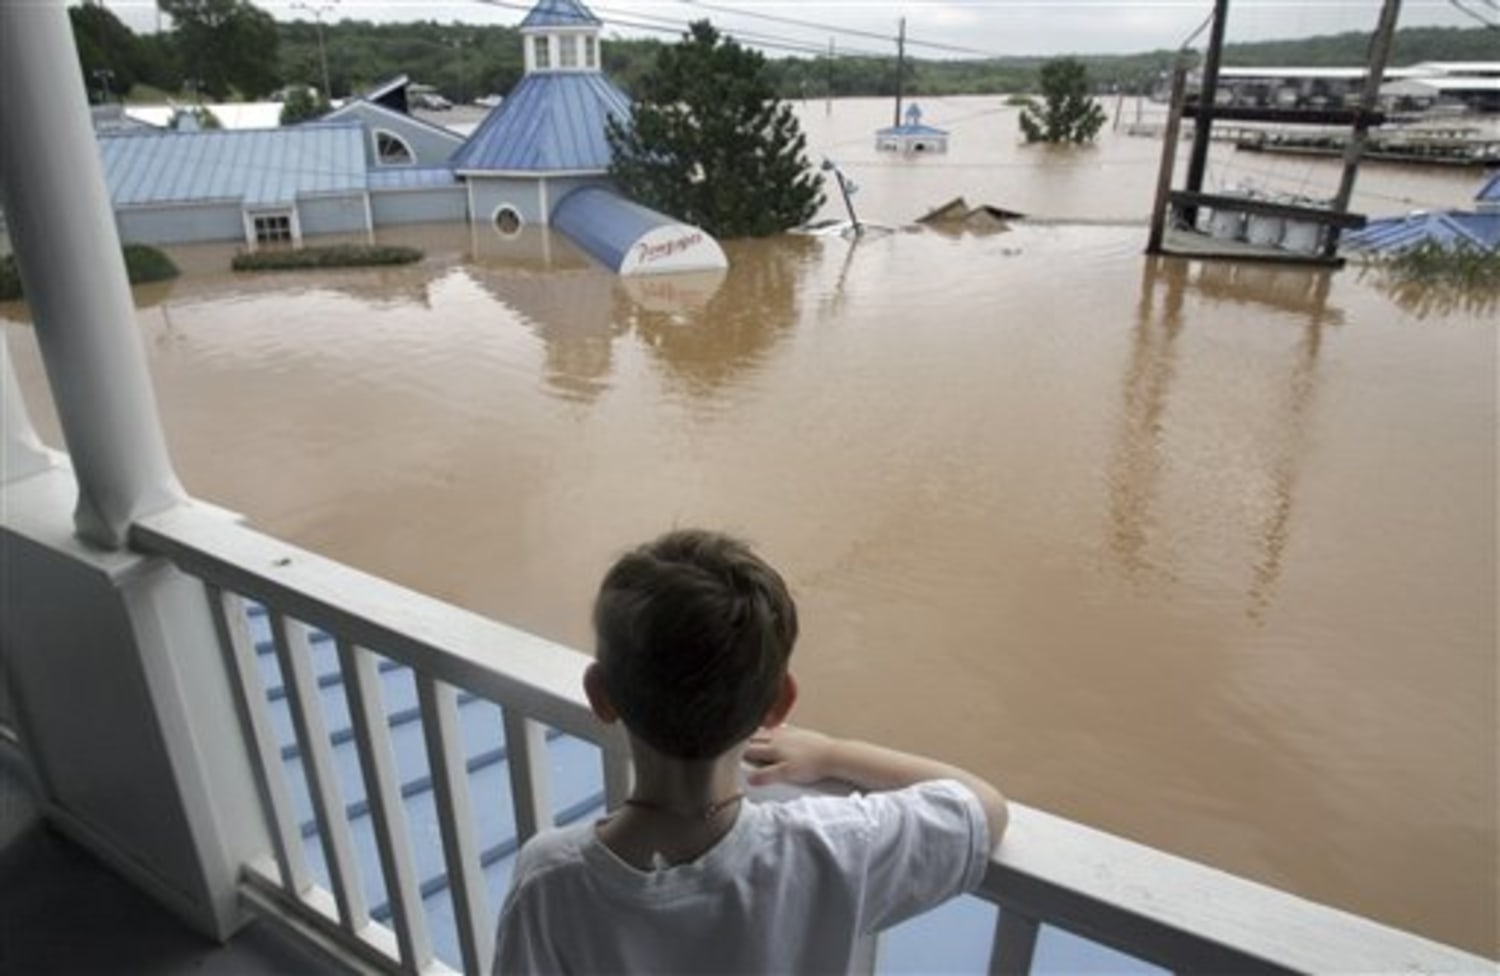 New Storms Bring Fresh Floods To Soaked